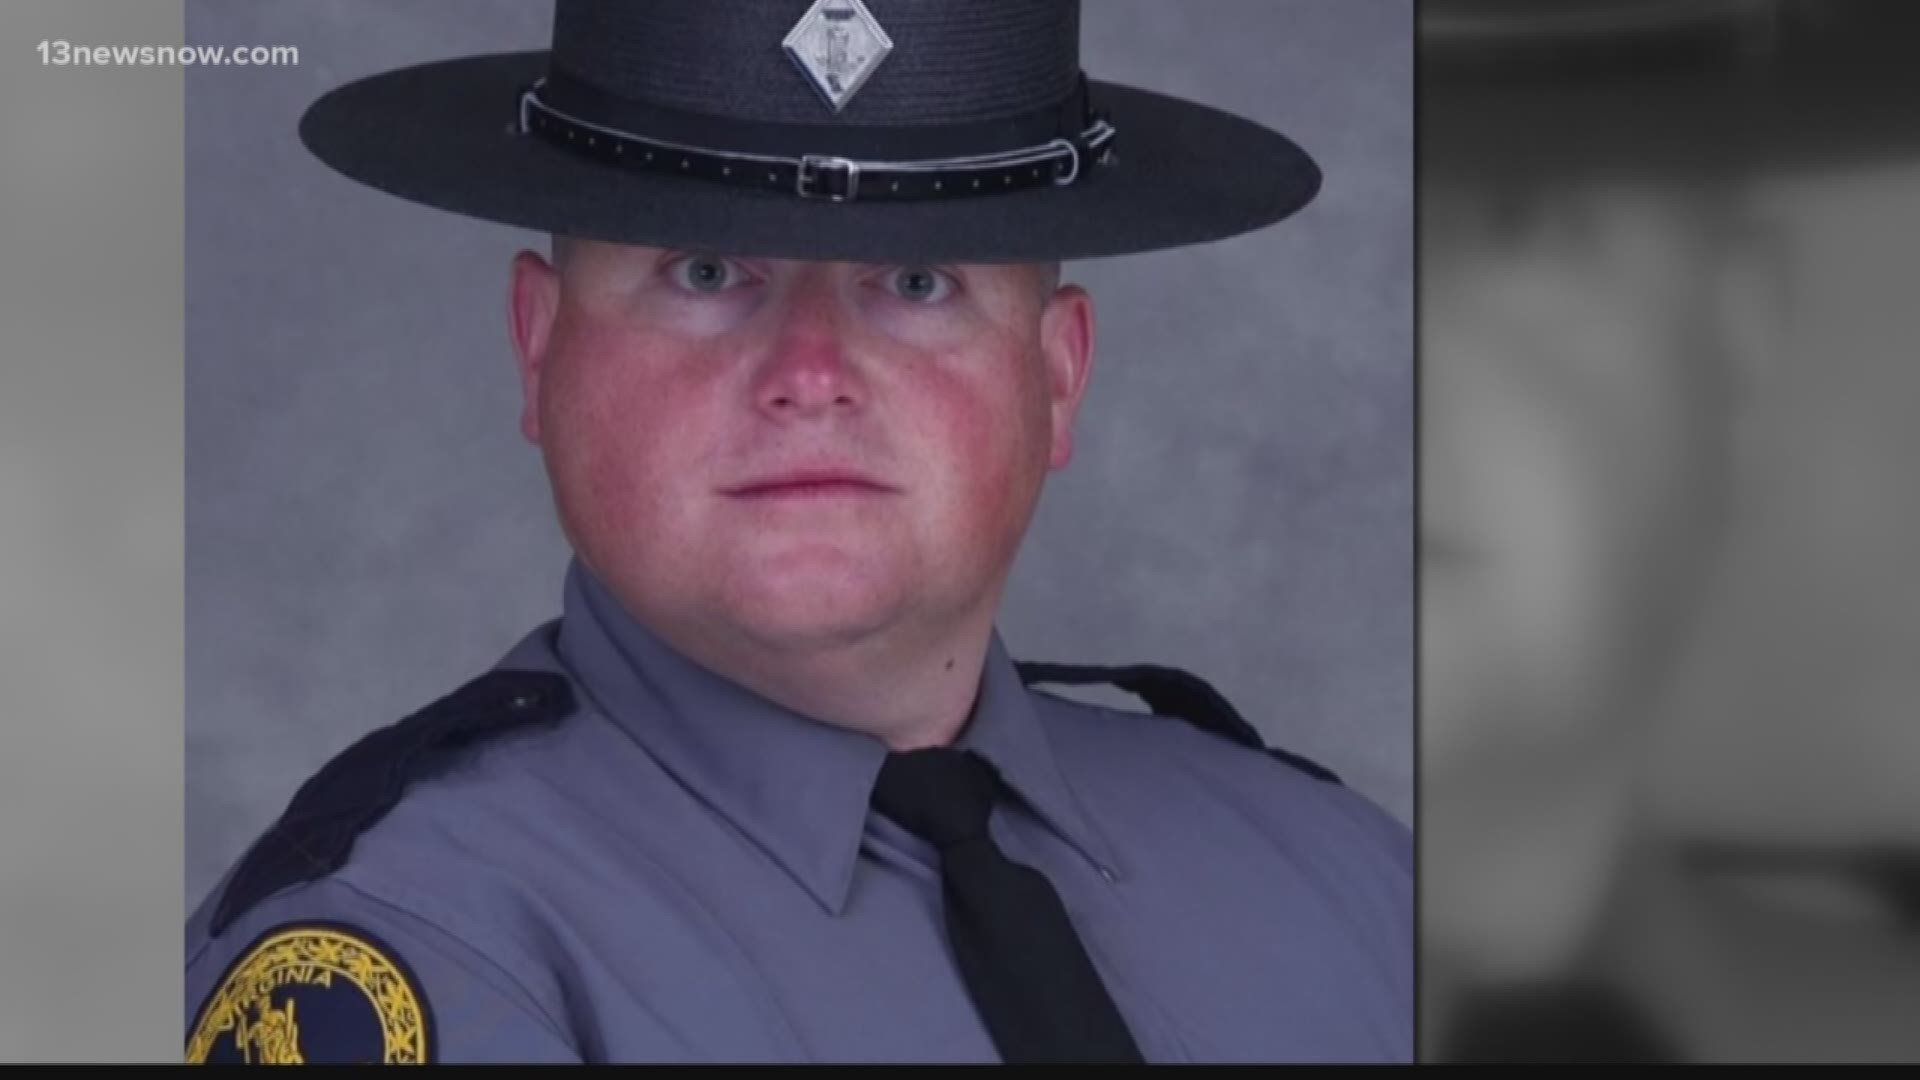 A special honor Wednesday for a state trooper killed in the line of duty.